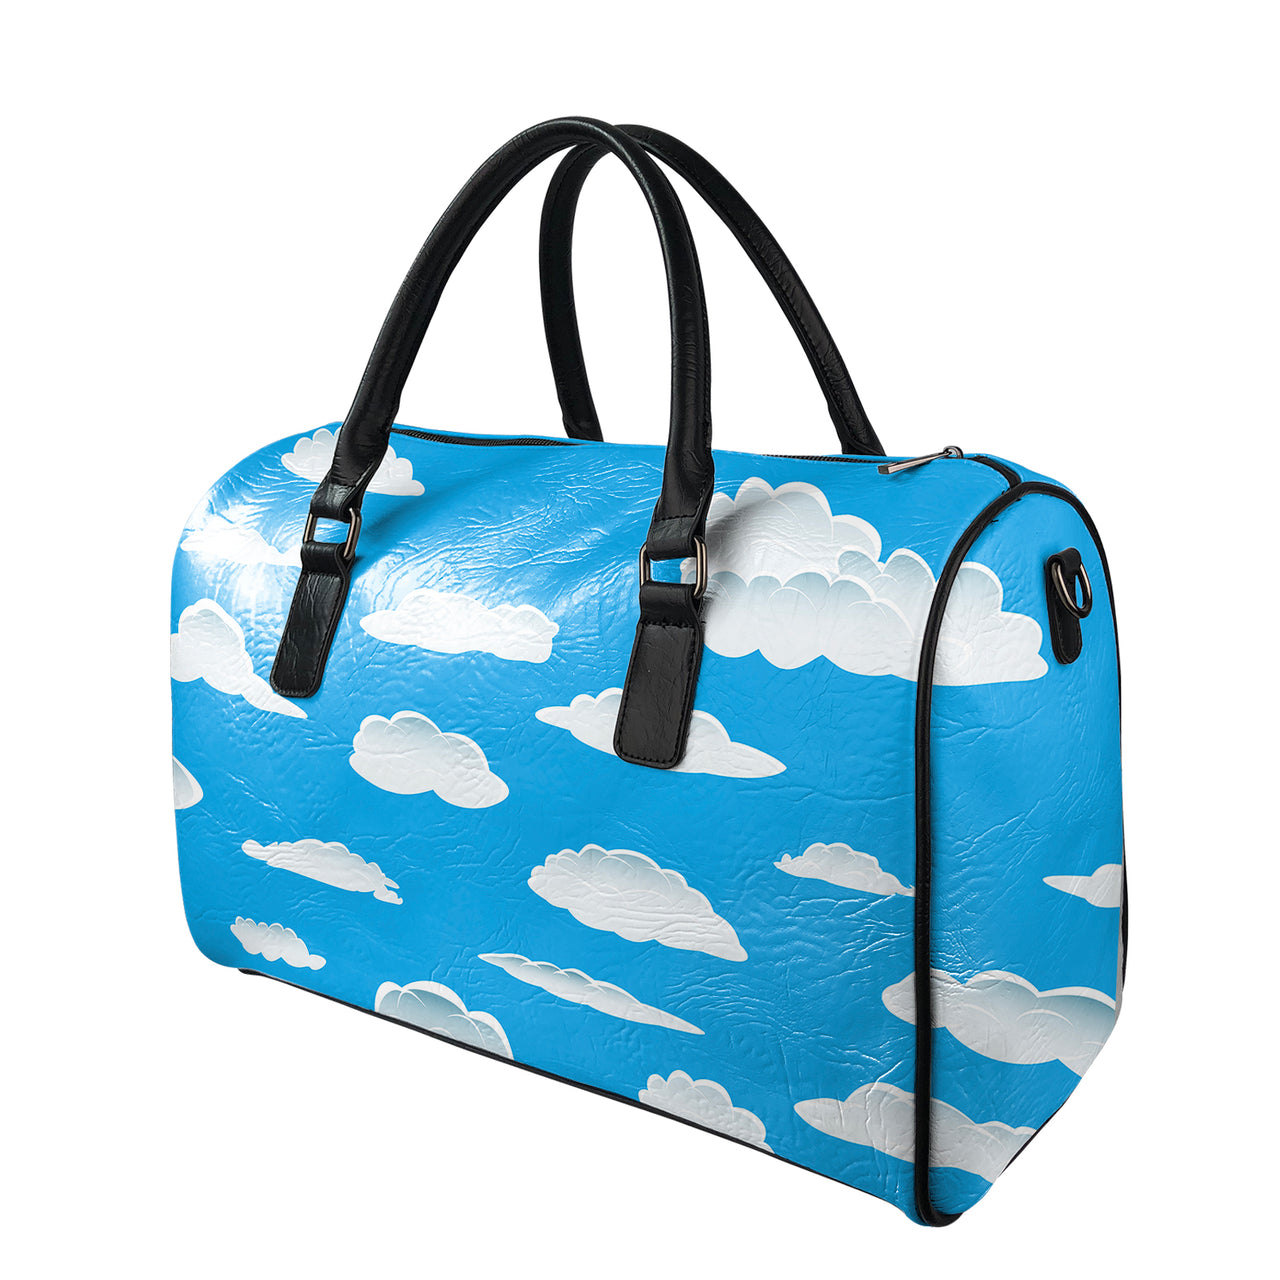 Amazing Clouds Designed Leather Travel Bag